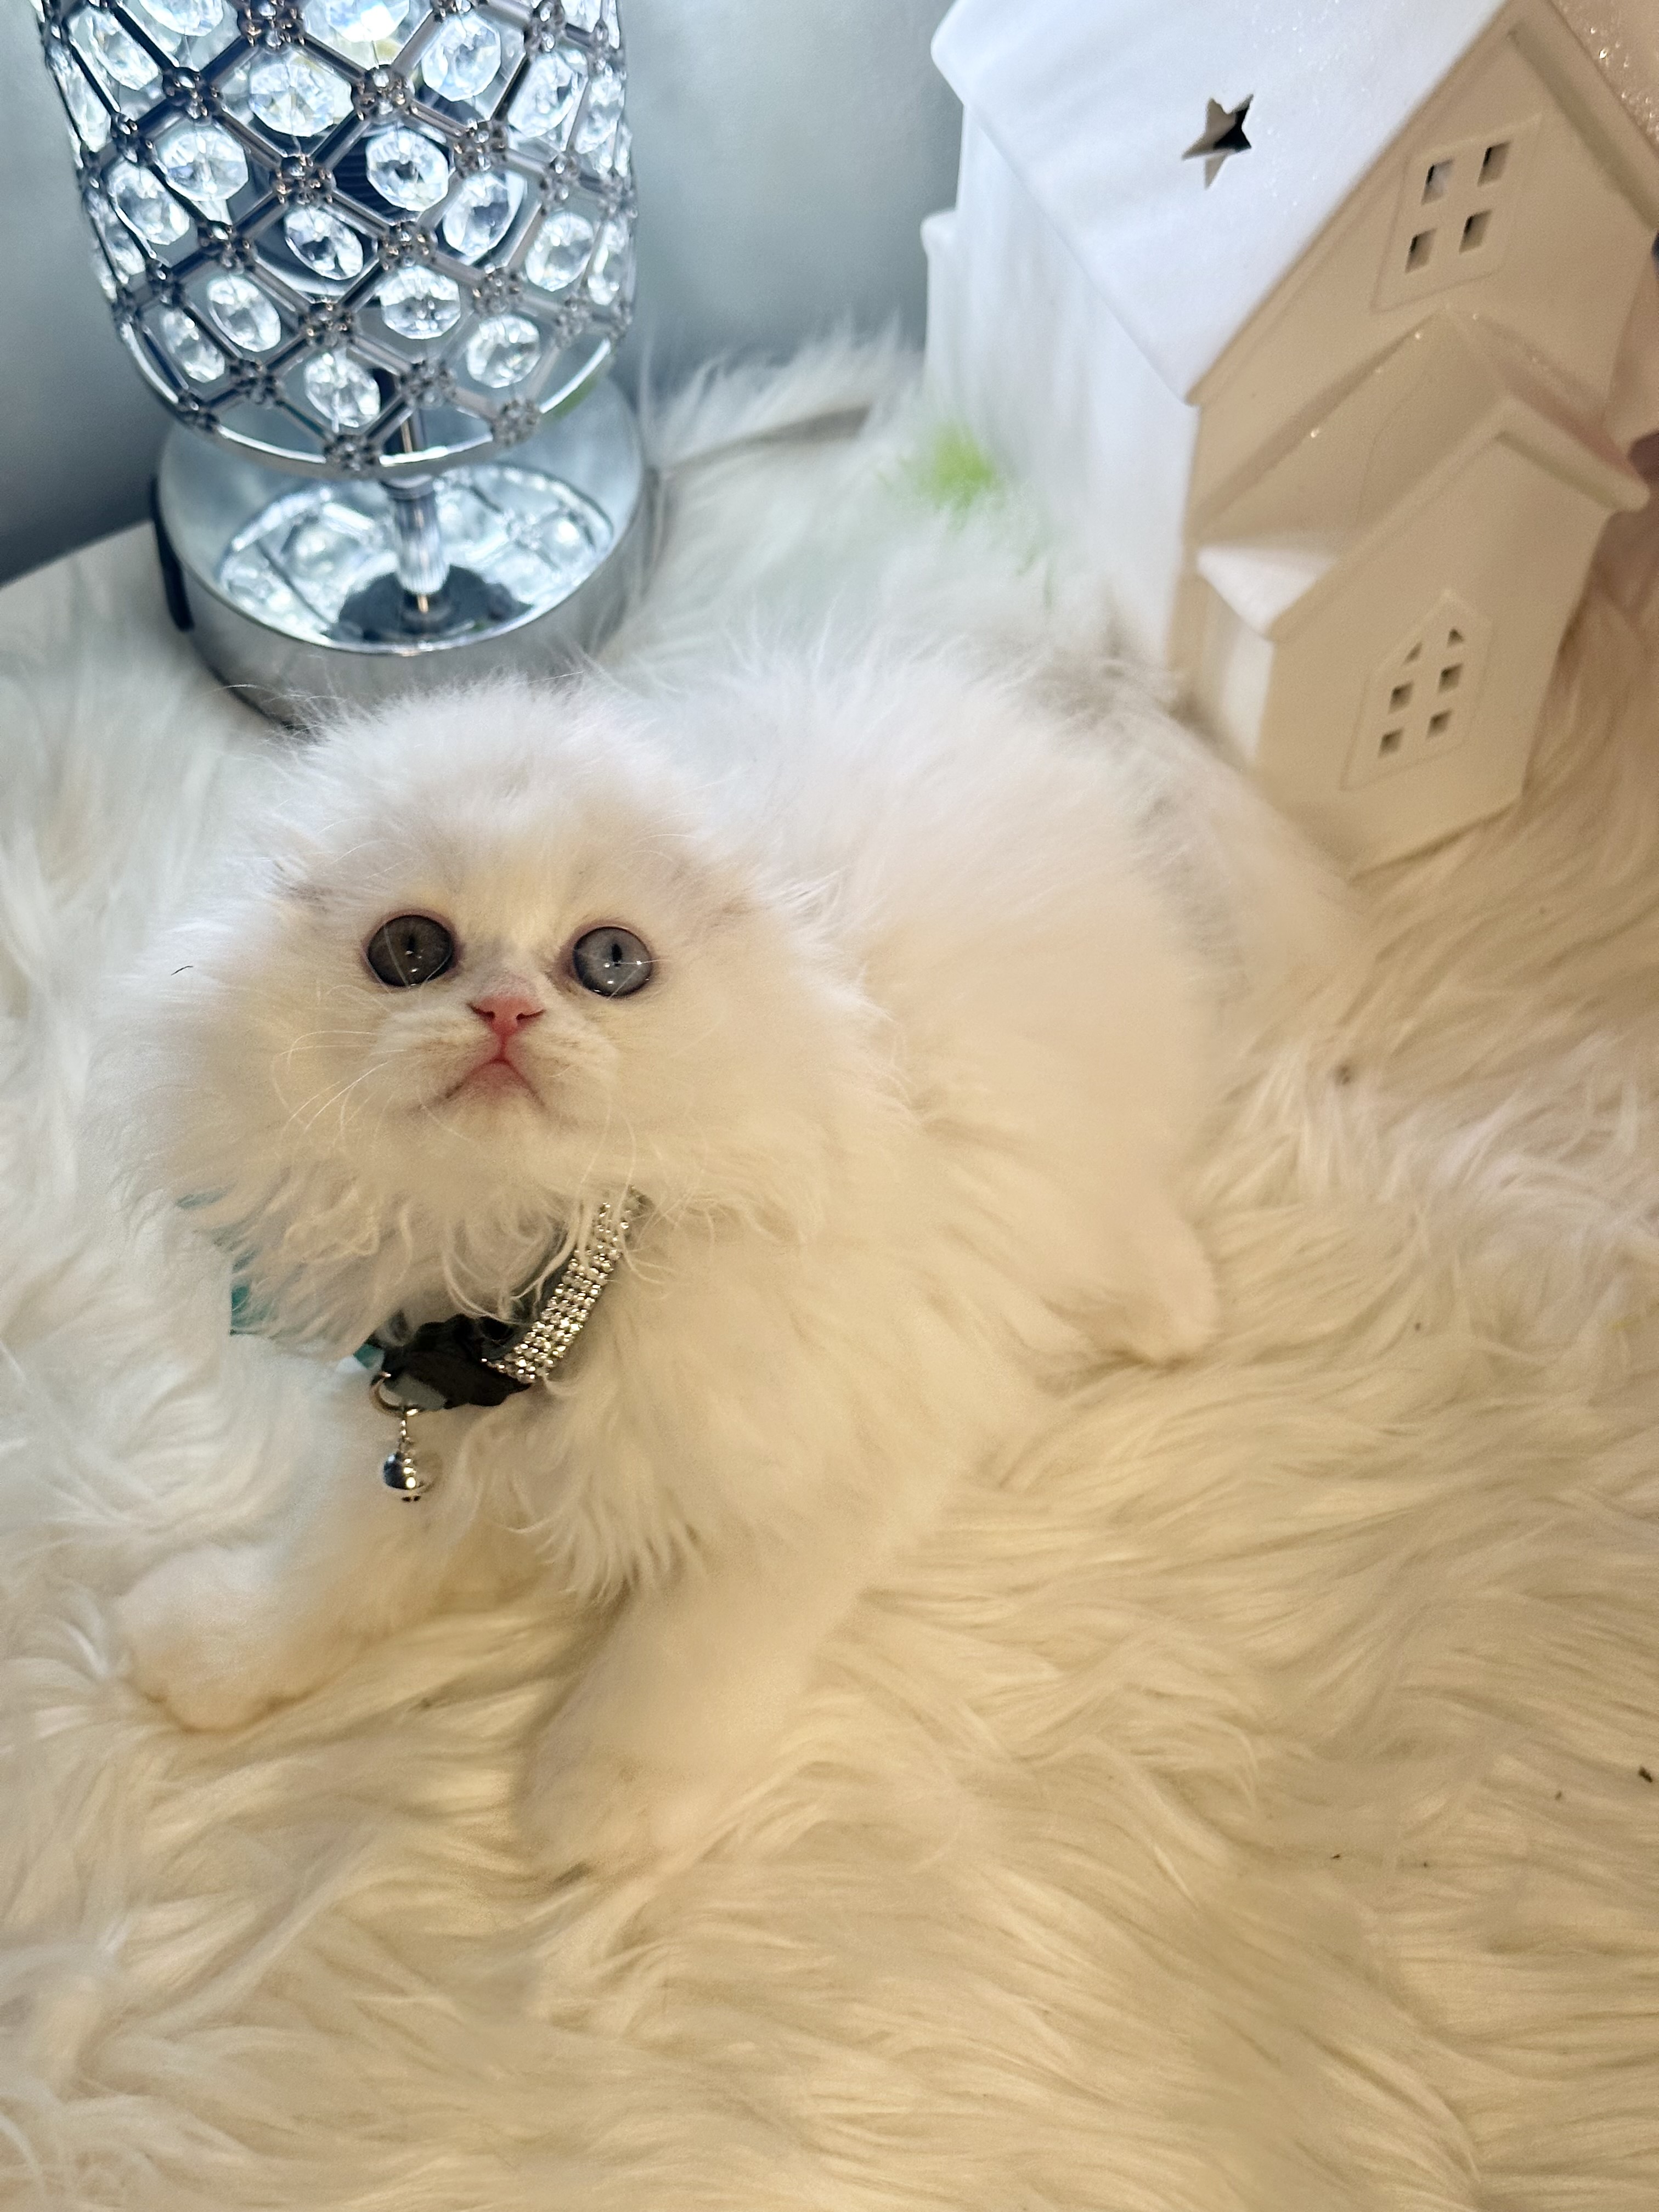 Ivory, Very sweet and adorable white Scottish Fold longhair with odd eyes 9 weeks old